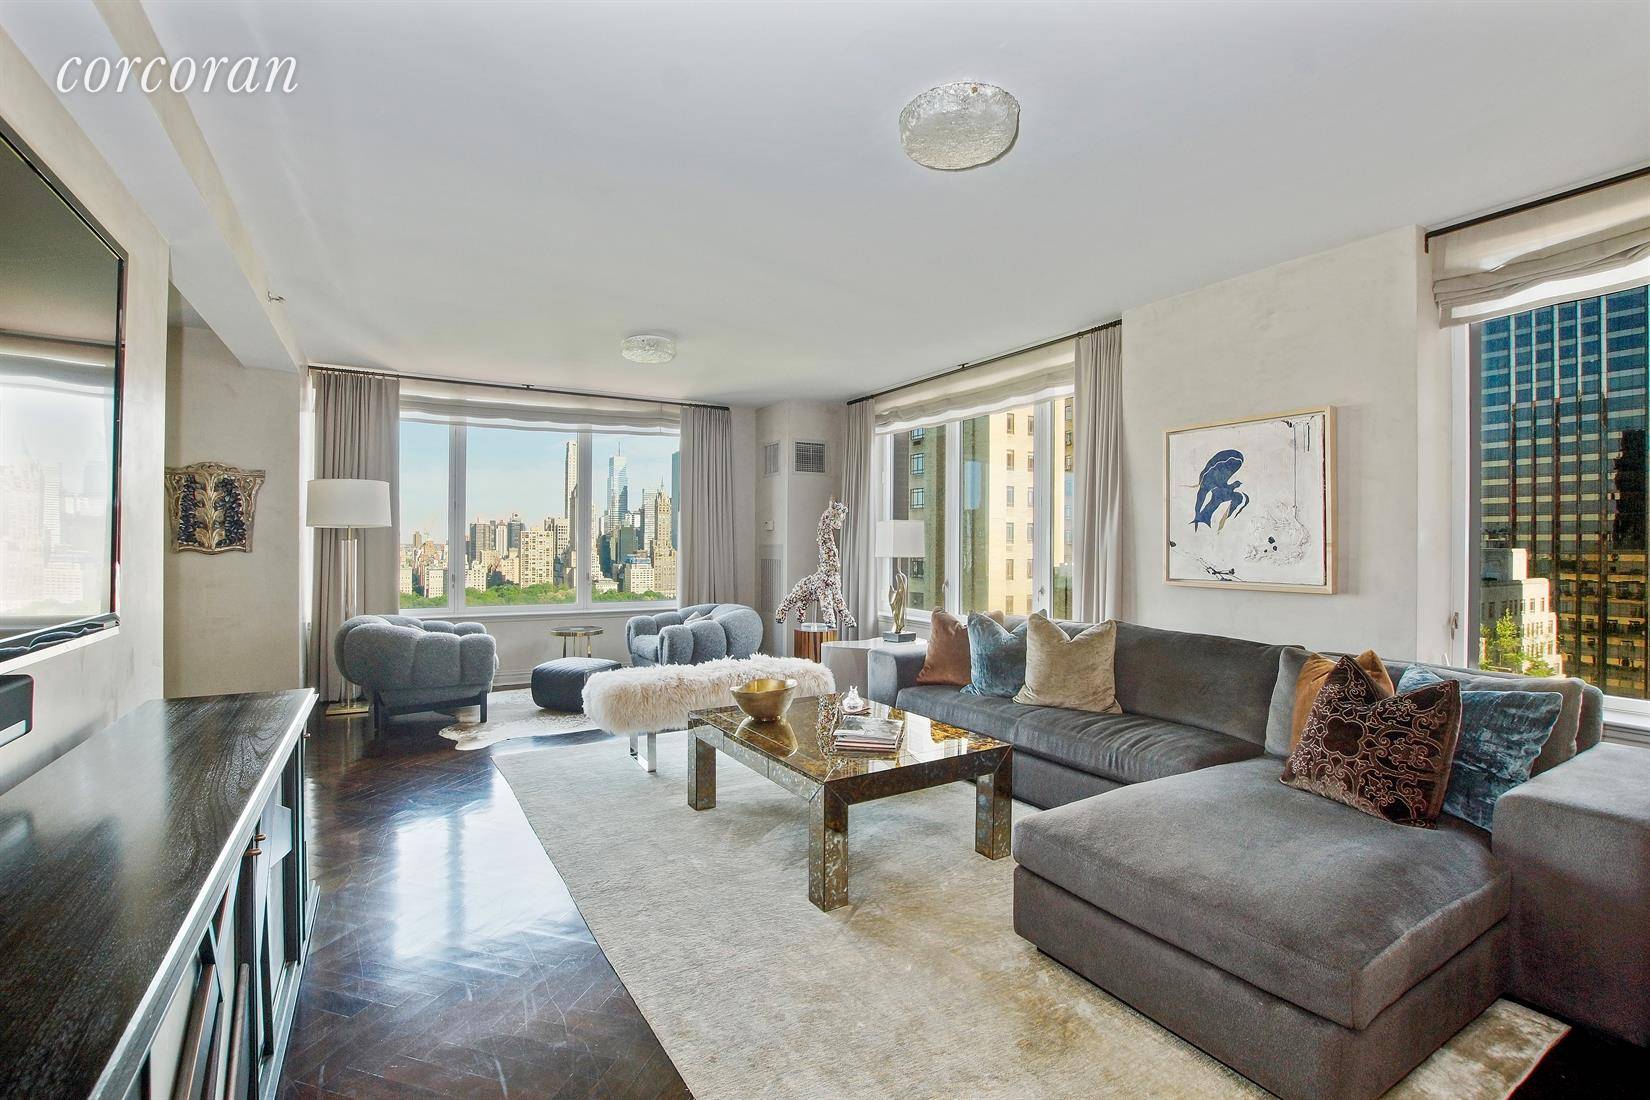 Breathtaking views of Central Park from this sprawling 4 bedroom 4.